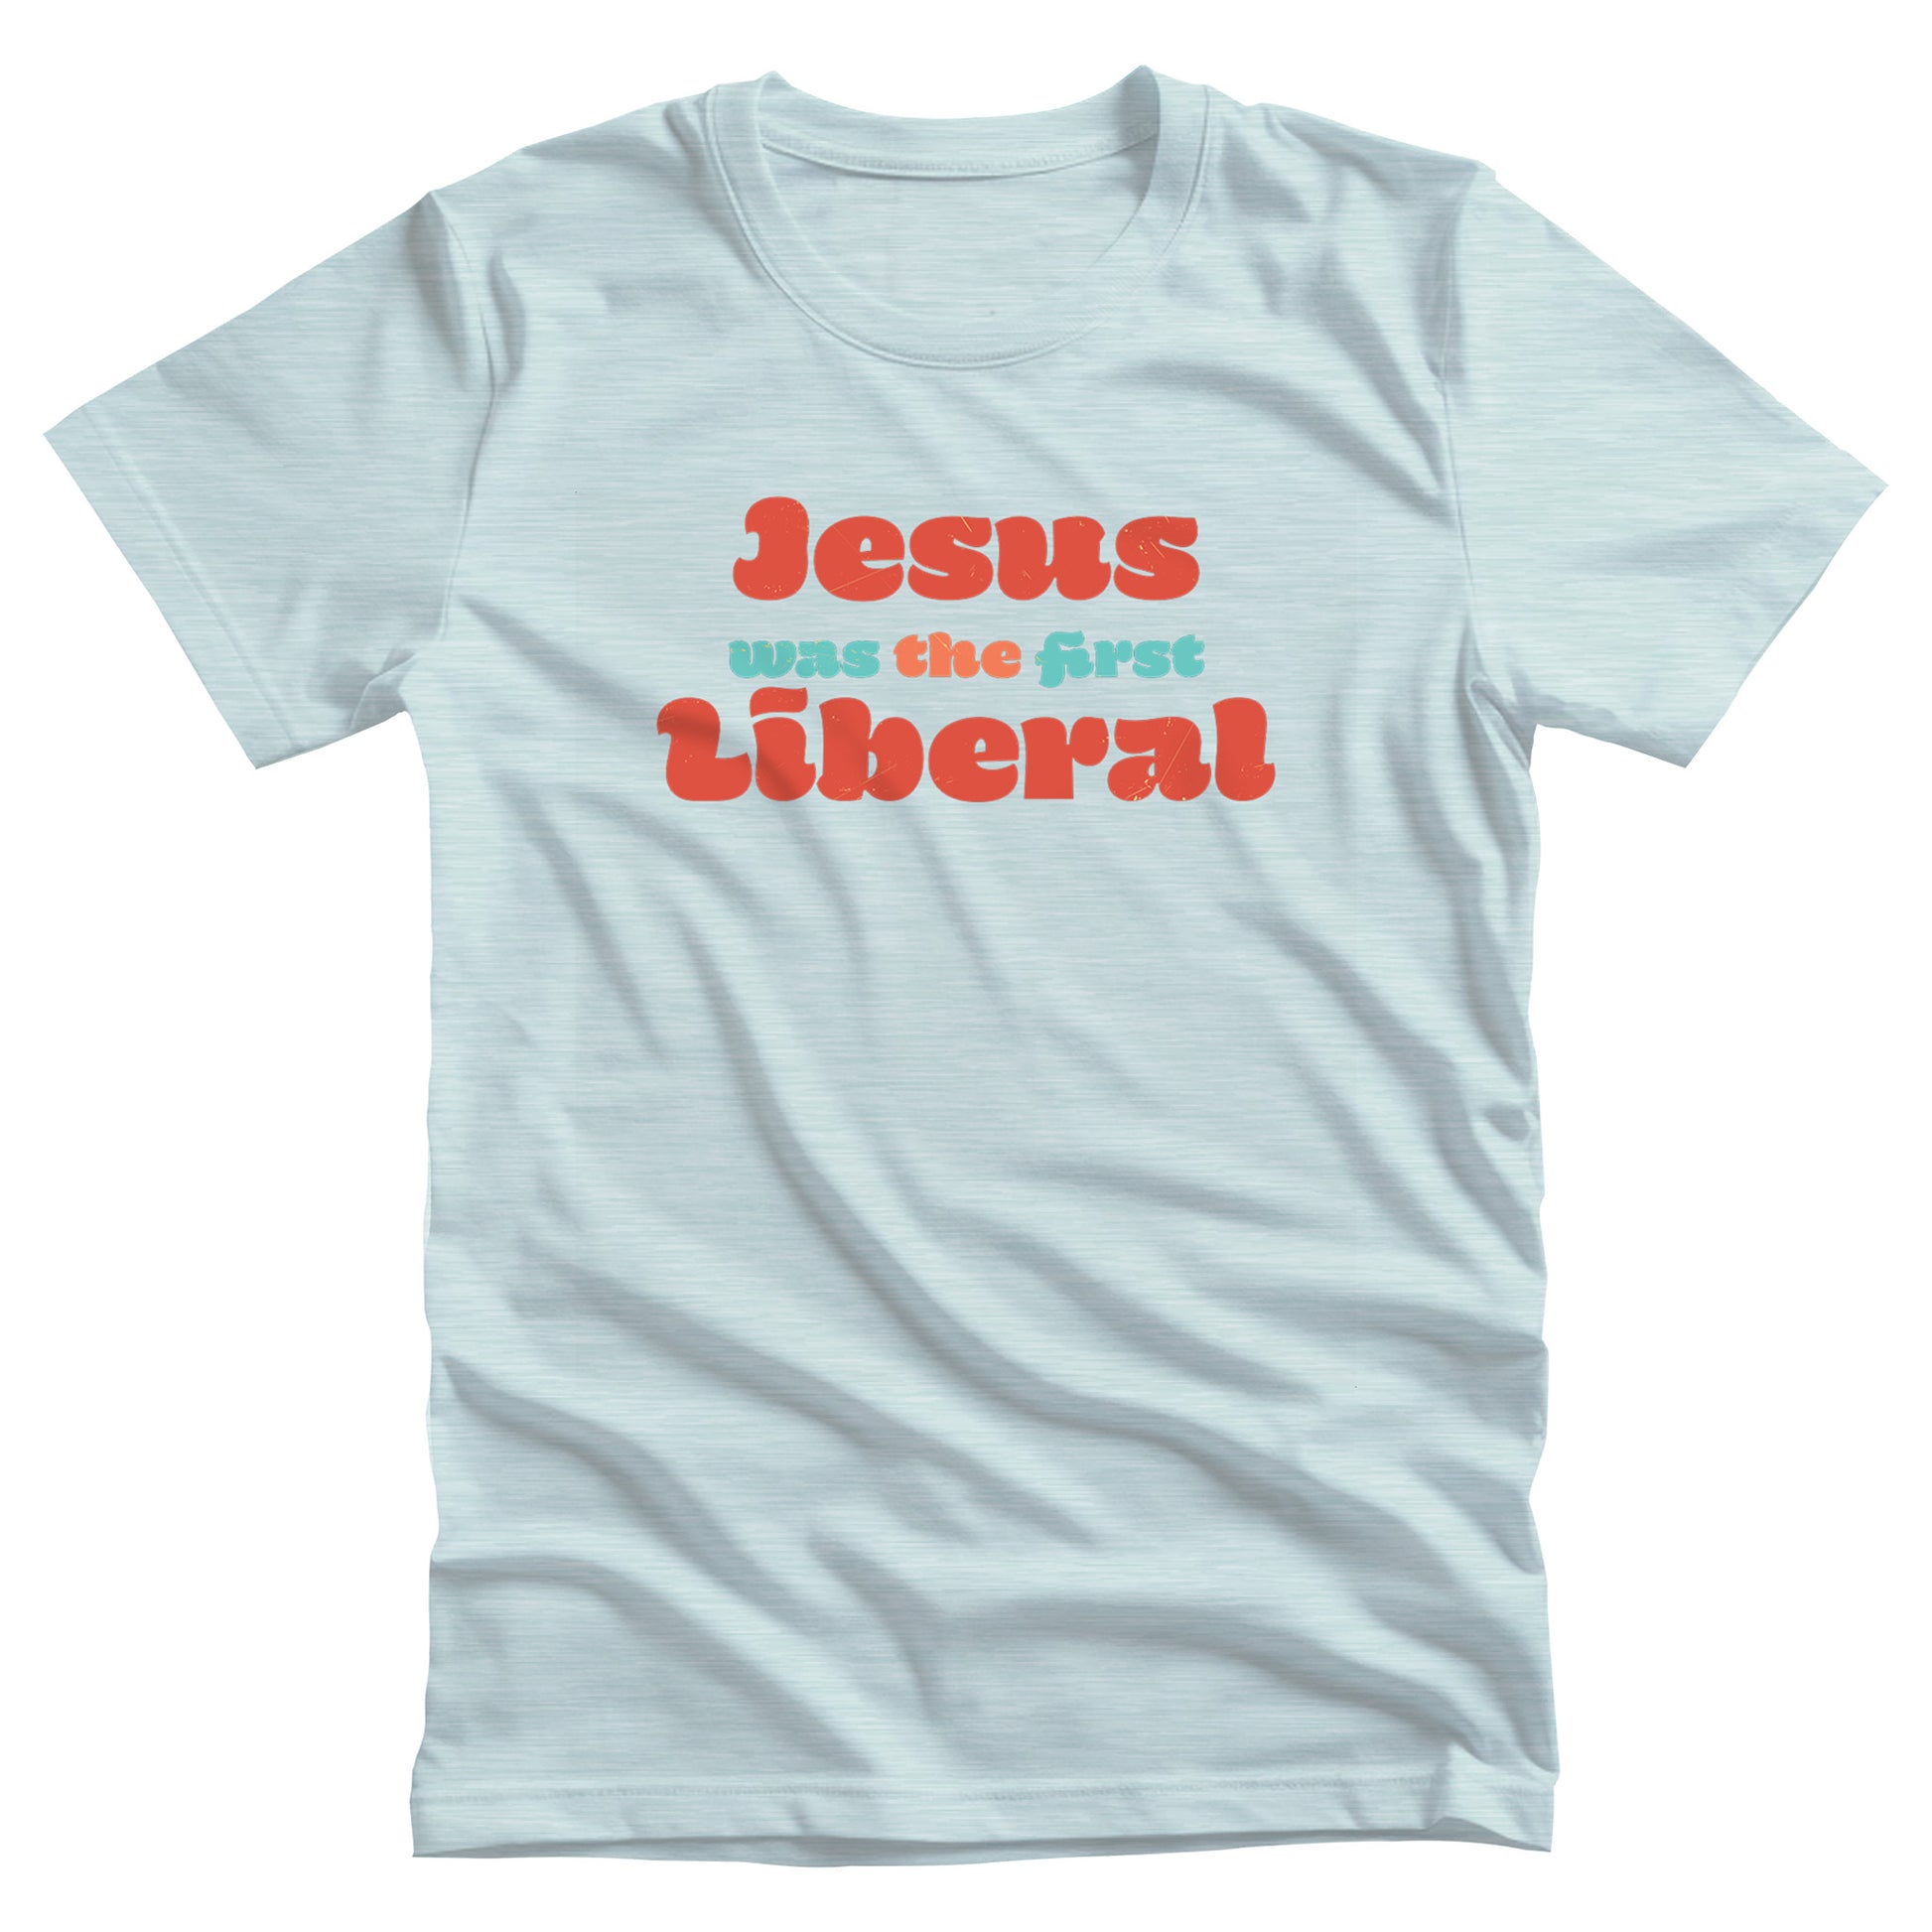 Heather Ice Blue color unisex t-shirt that says, “Jesus was the first Liberal.” The words “Jesus”, “the”, and “Liberal” are all a shade of orange, and the words “Was” and “First” are a light blue-green.